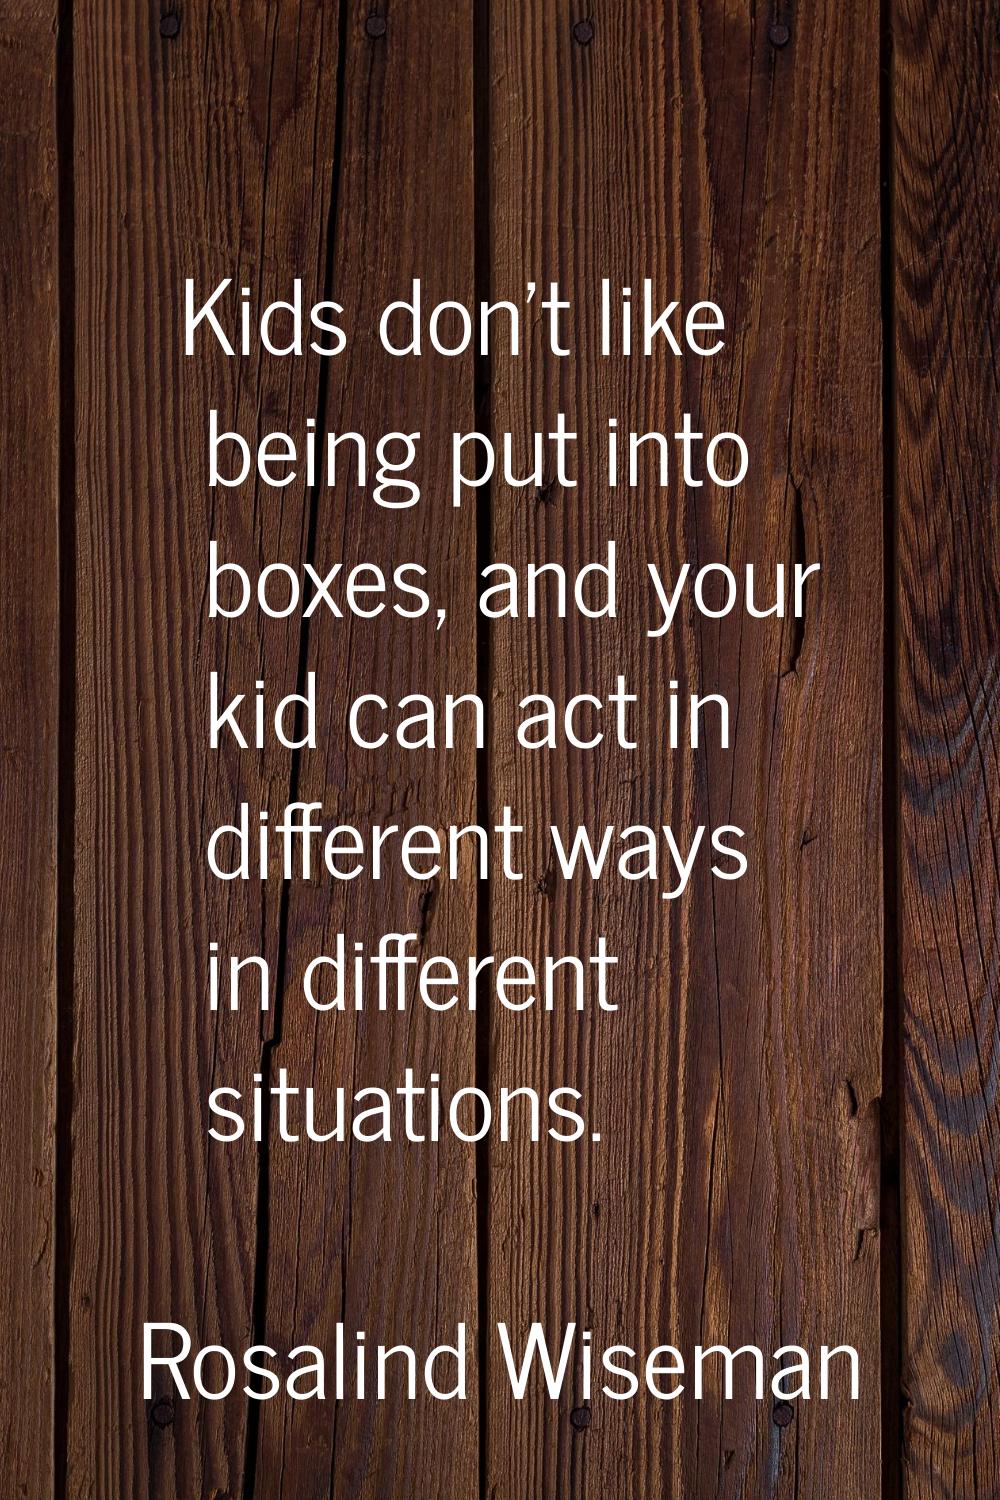 Kids don't like being put into boxes, and your kid can act in different ways in different situation